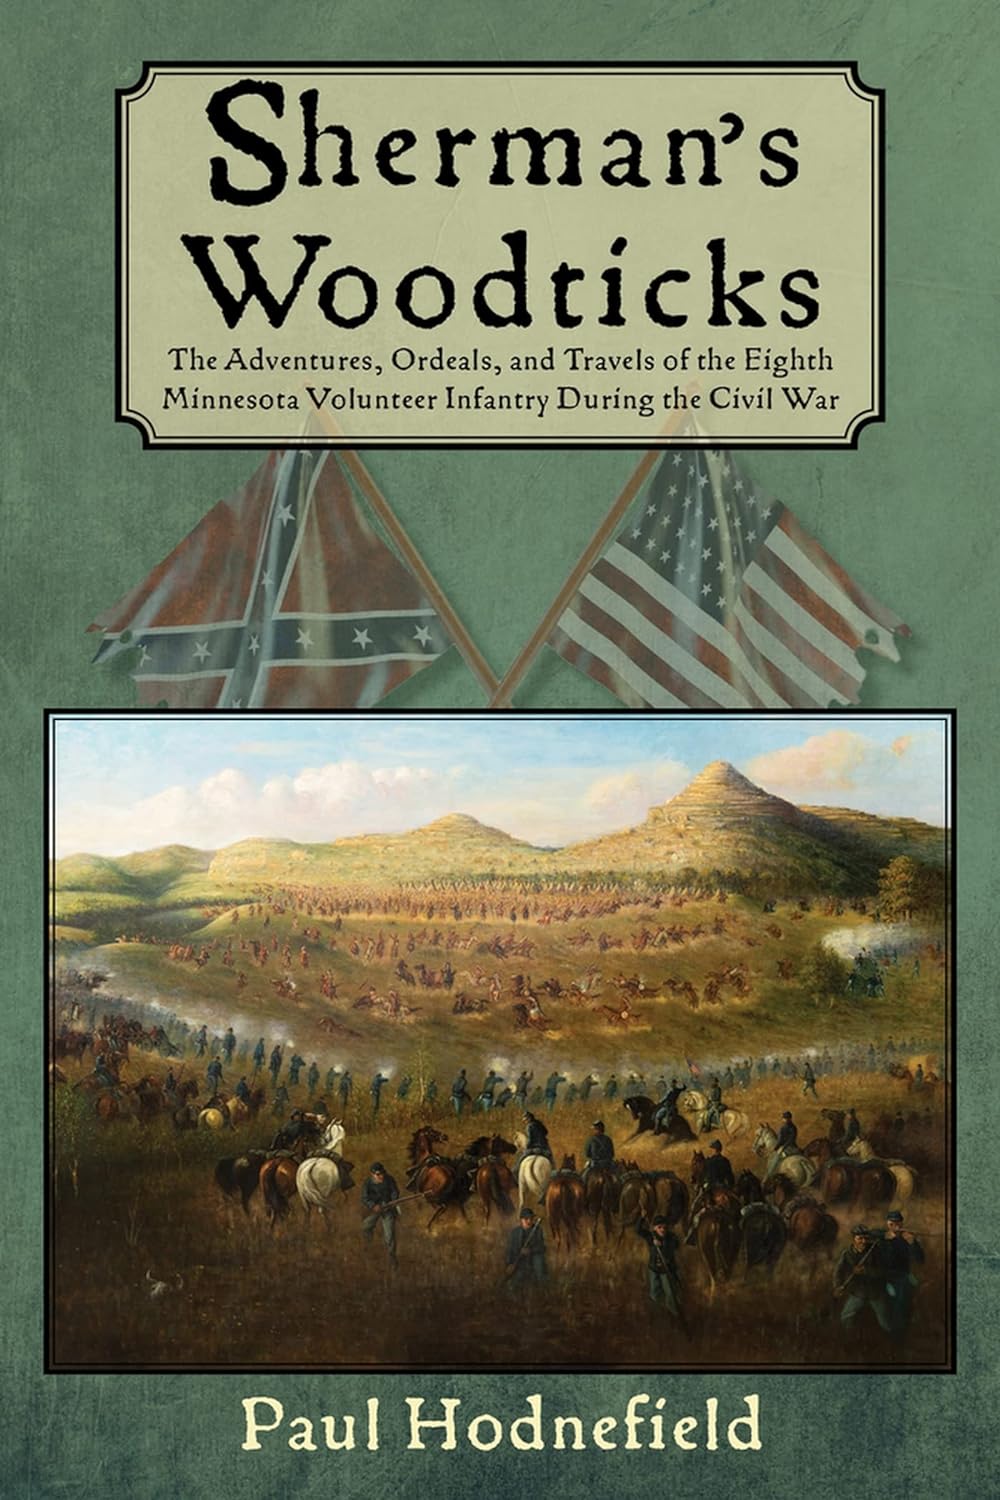 Sherman's Woodticks: The Adventures, Ordeals and Travels of the Eighth Minnesota Volunteer Infantry During the Civil War